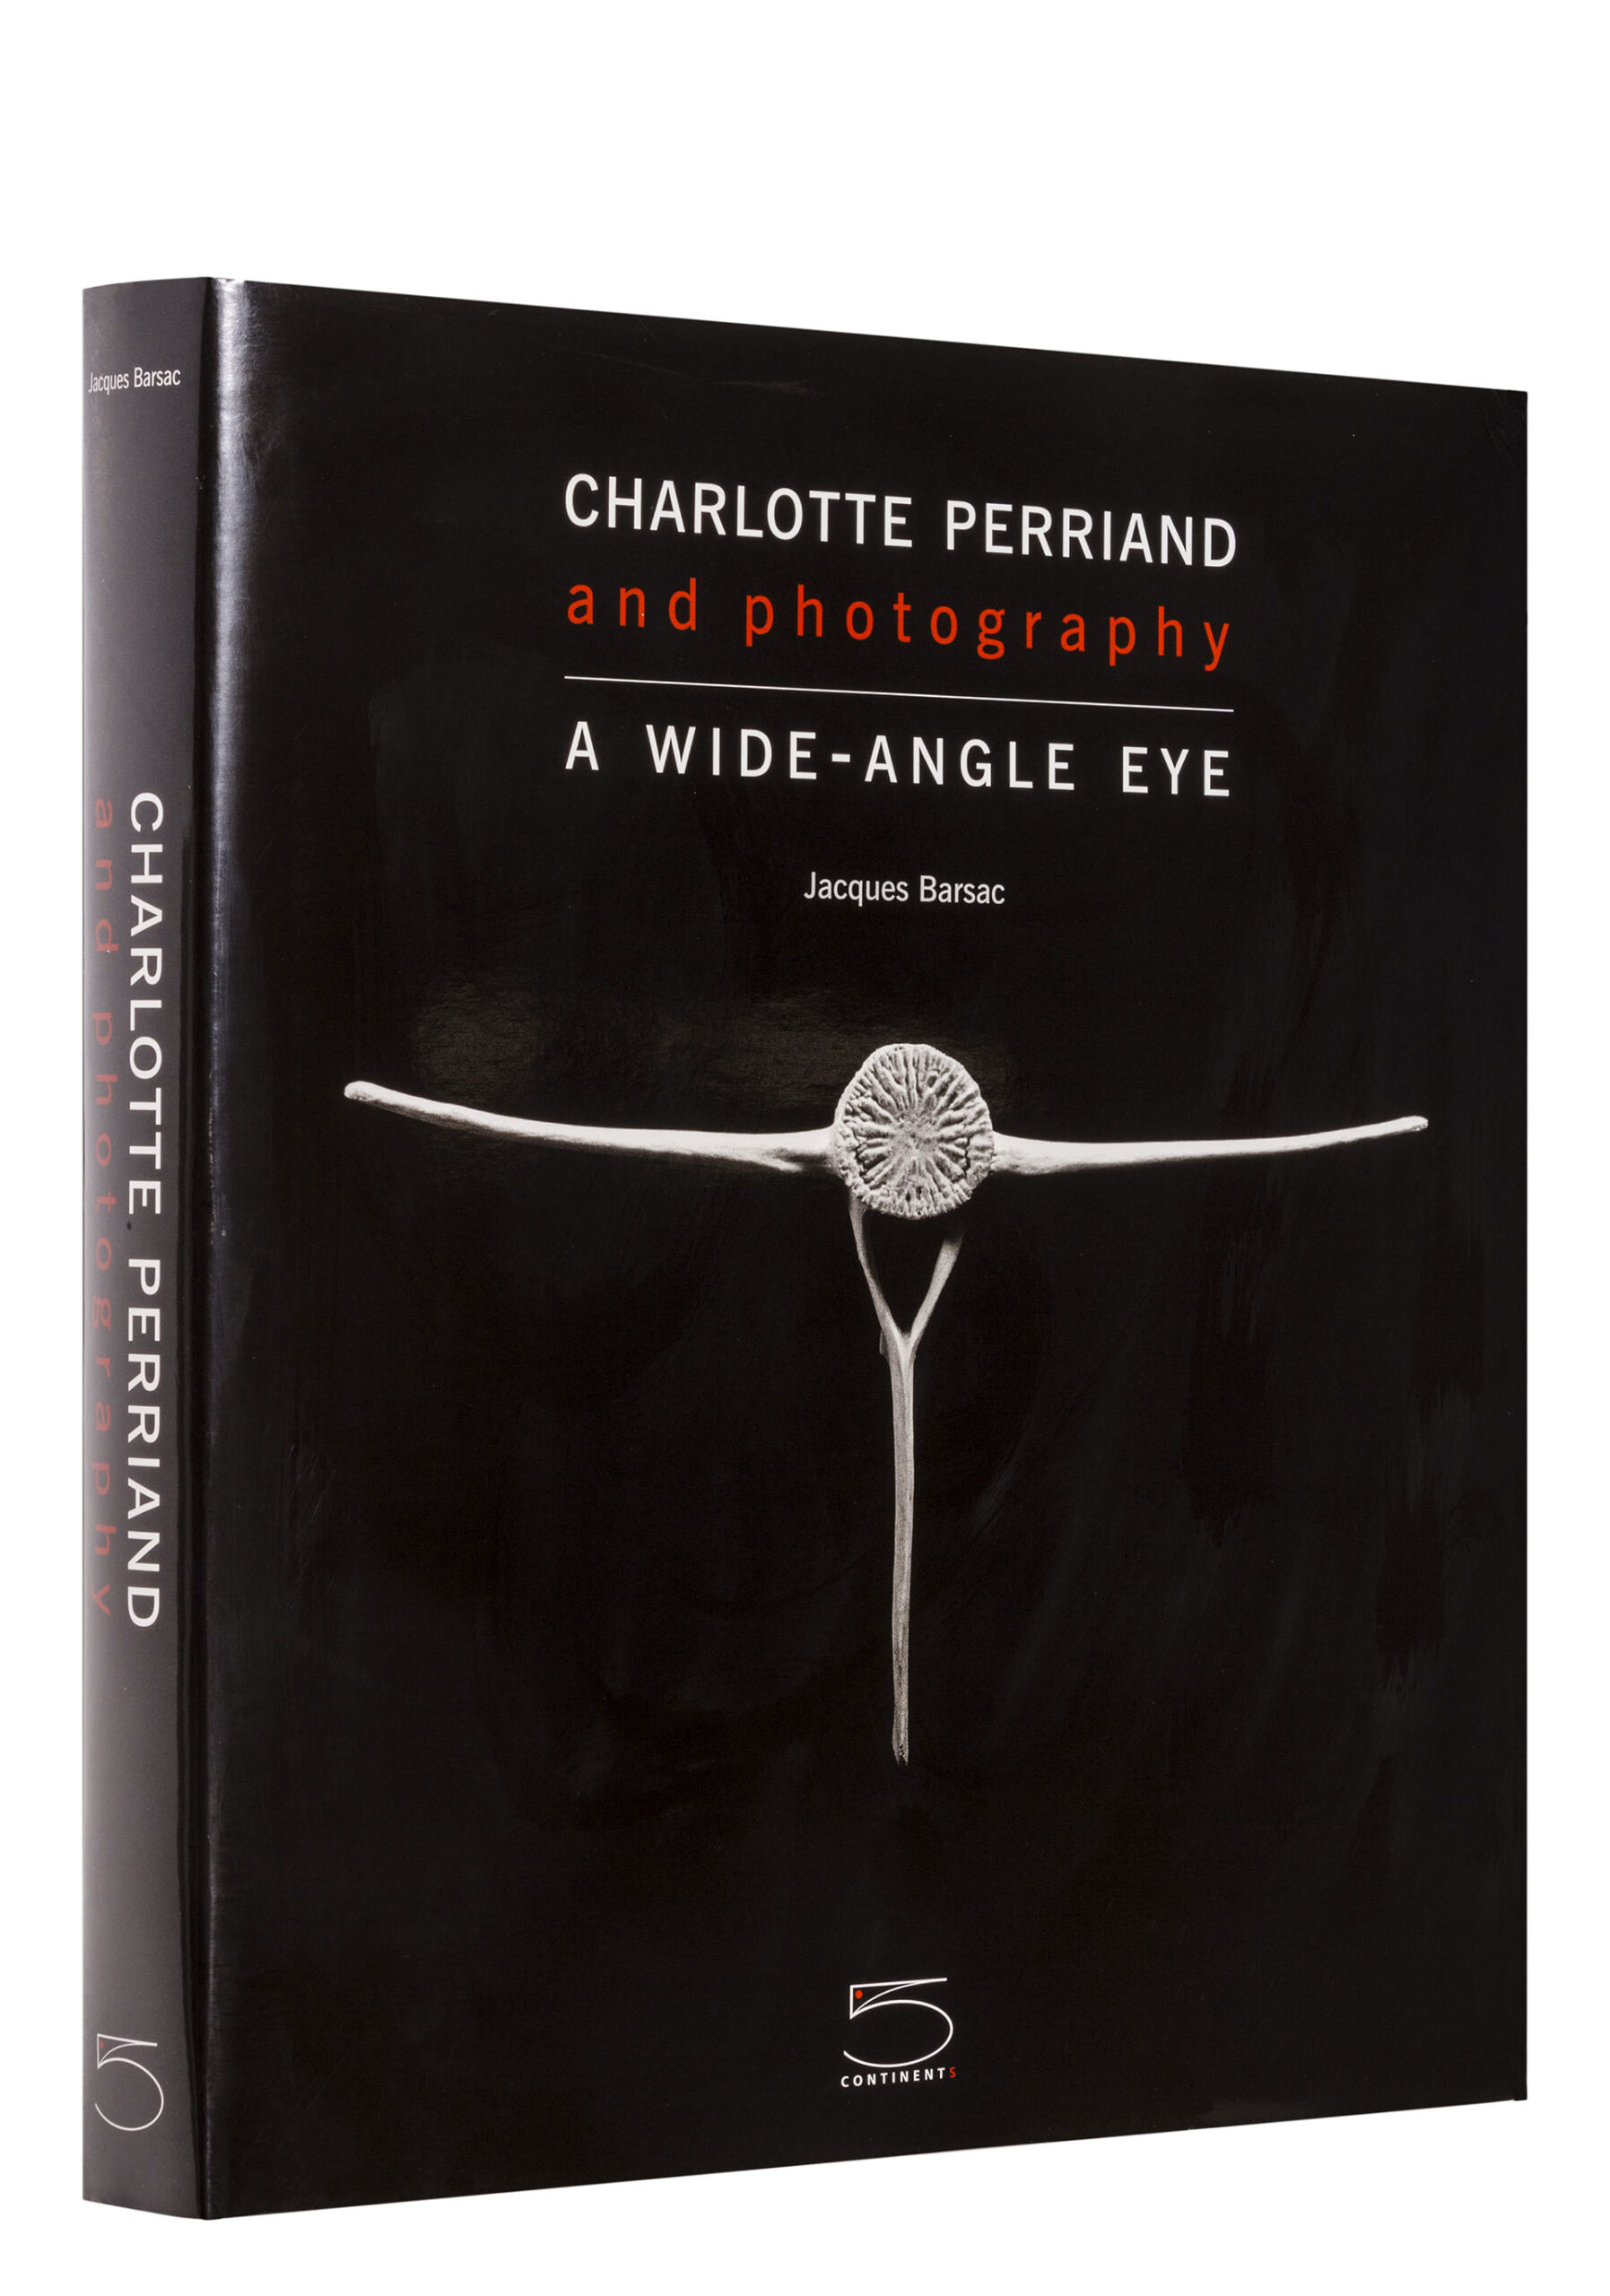 Charlotte Perriand and photography